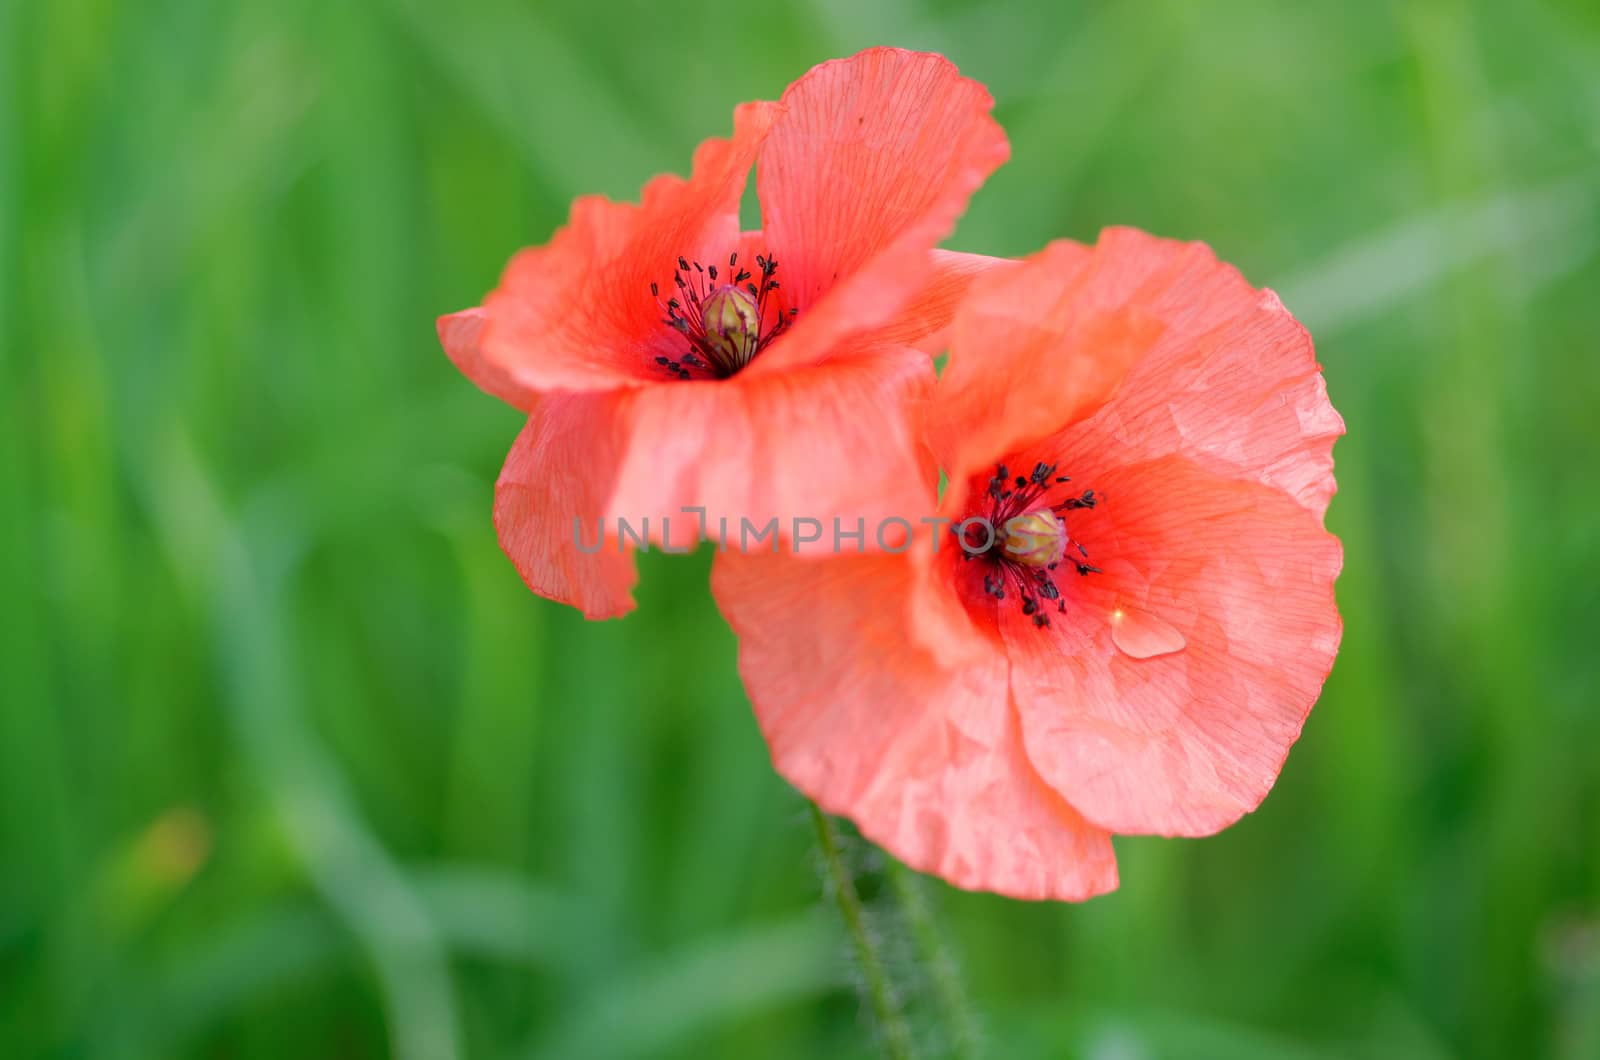 Two poppies by gufoto